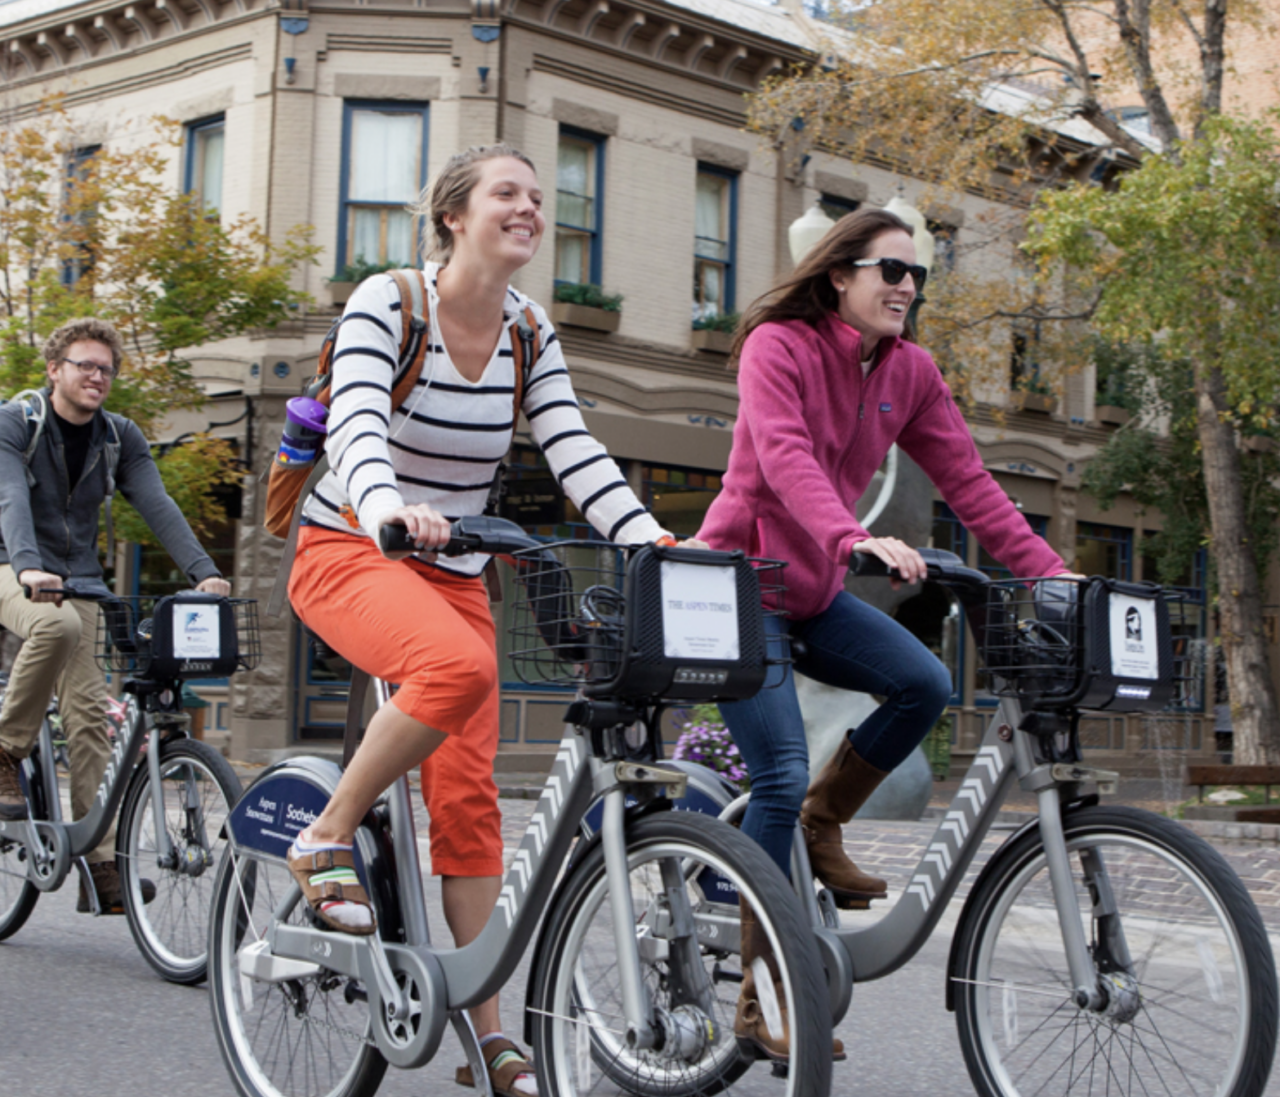 Bikeshare Solutions for Small Cities and Towns